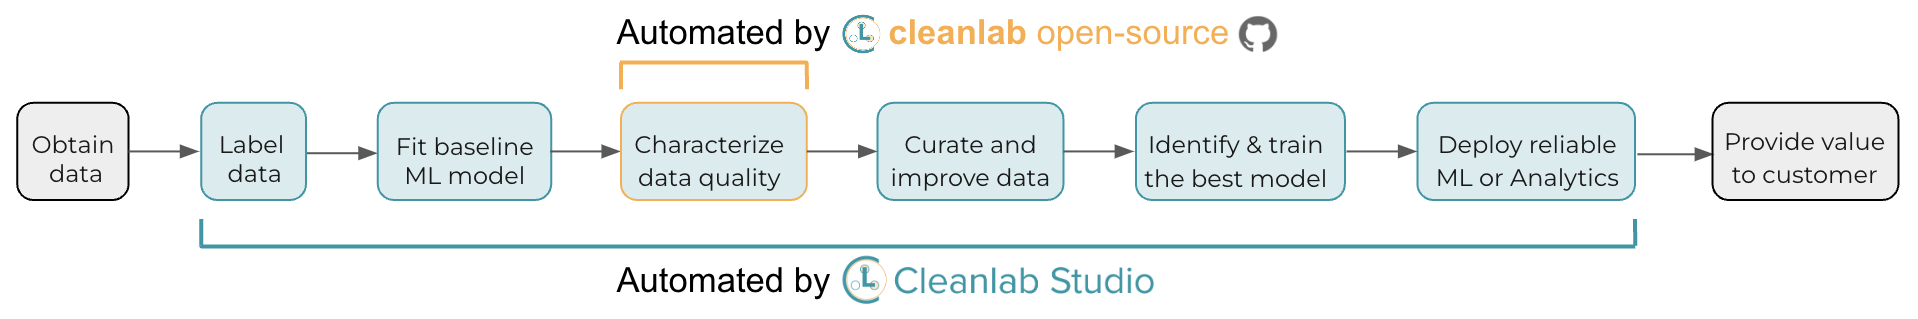 The modern AI pipeline and steps that are automated by Cleanlab